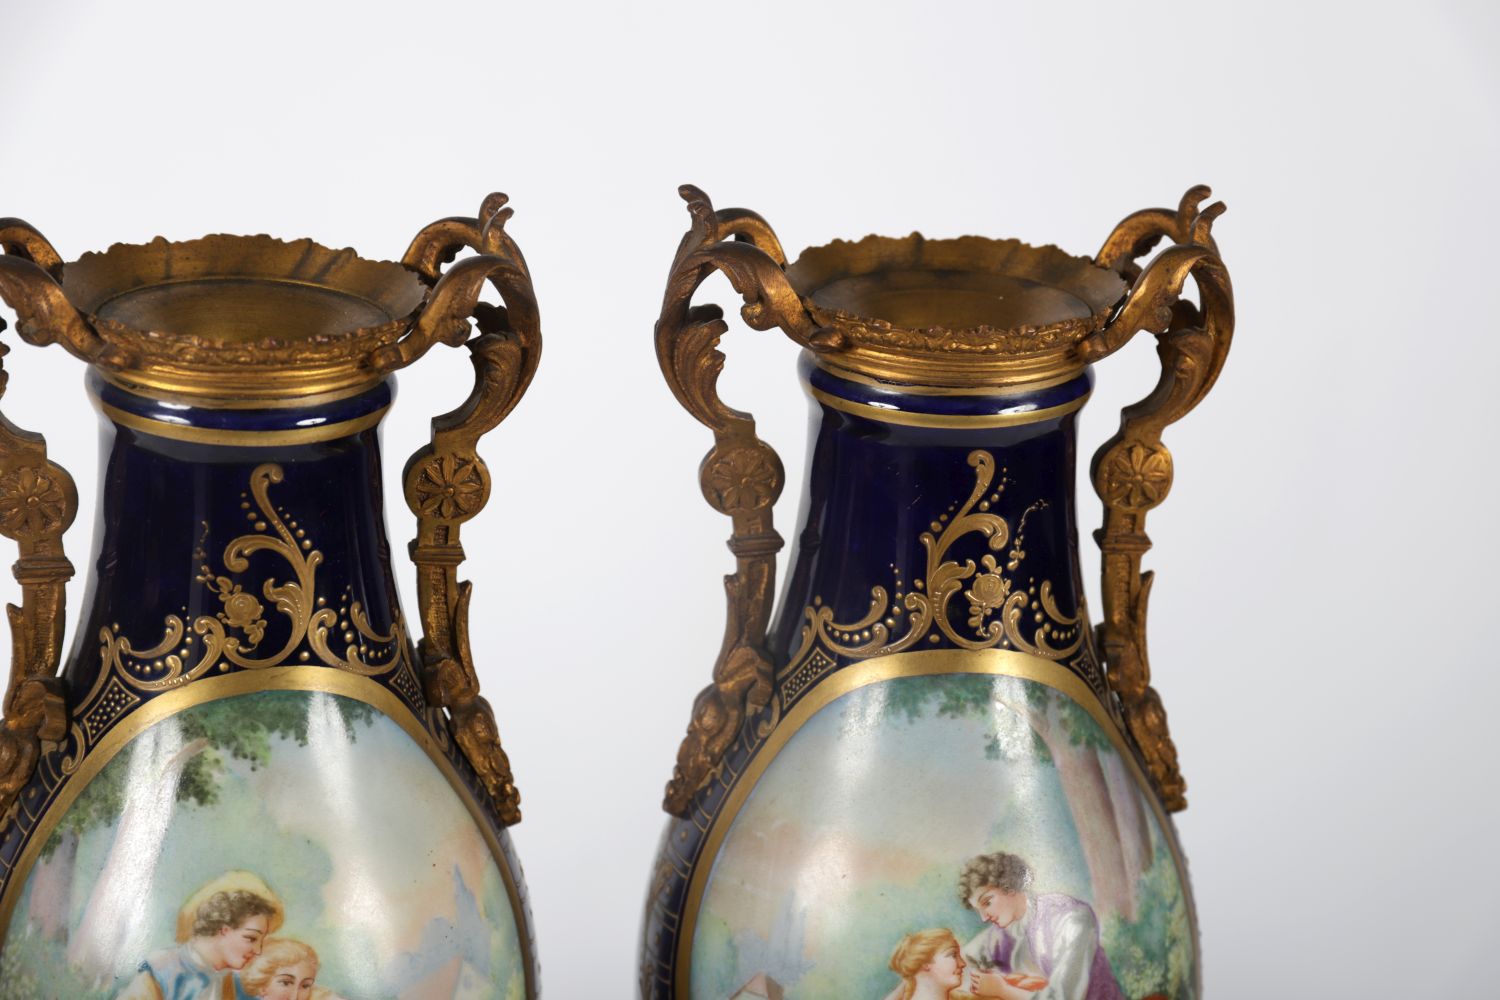 PAIR 19TH-CENTURY SEVRES ORMOLU MOUNTED VASES - Image 3 of 3